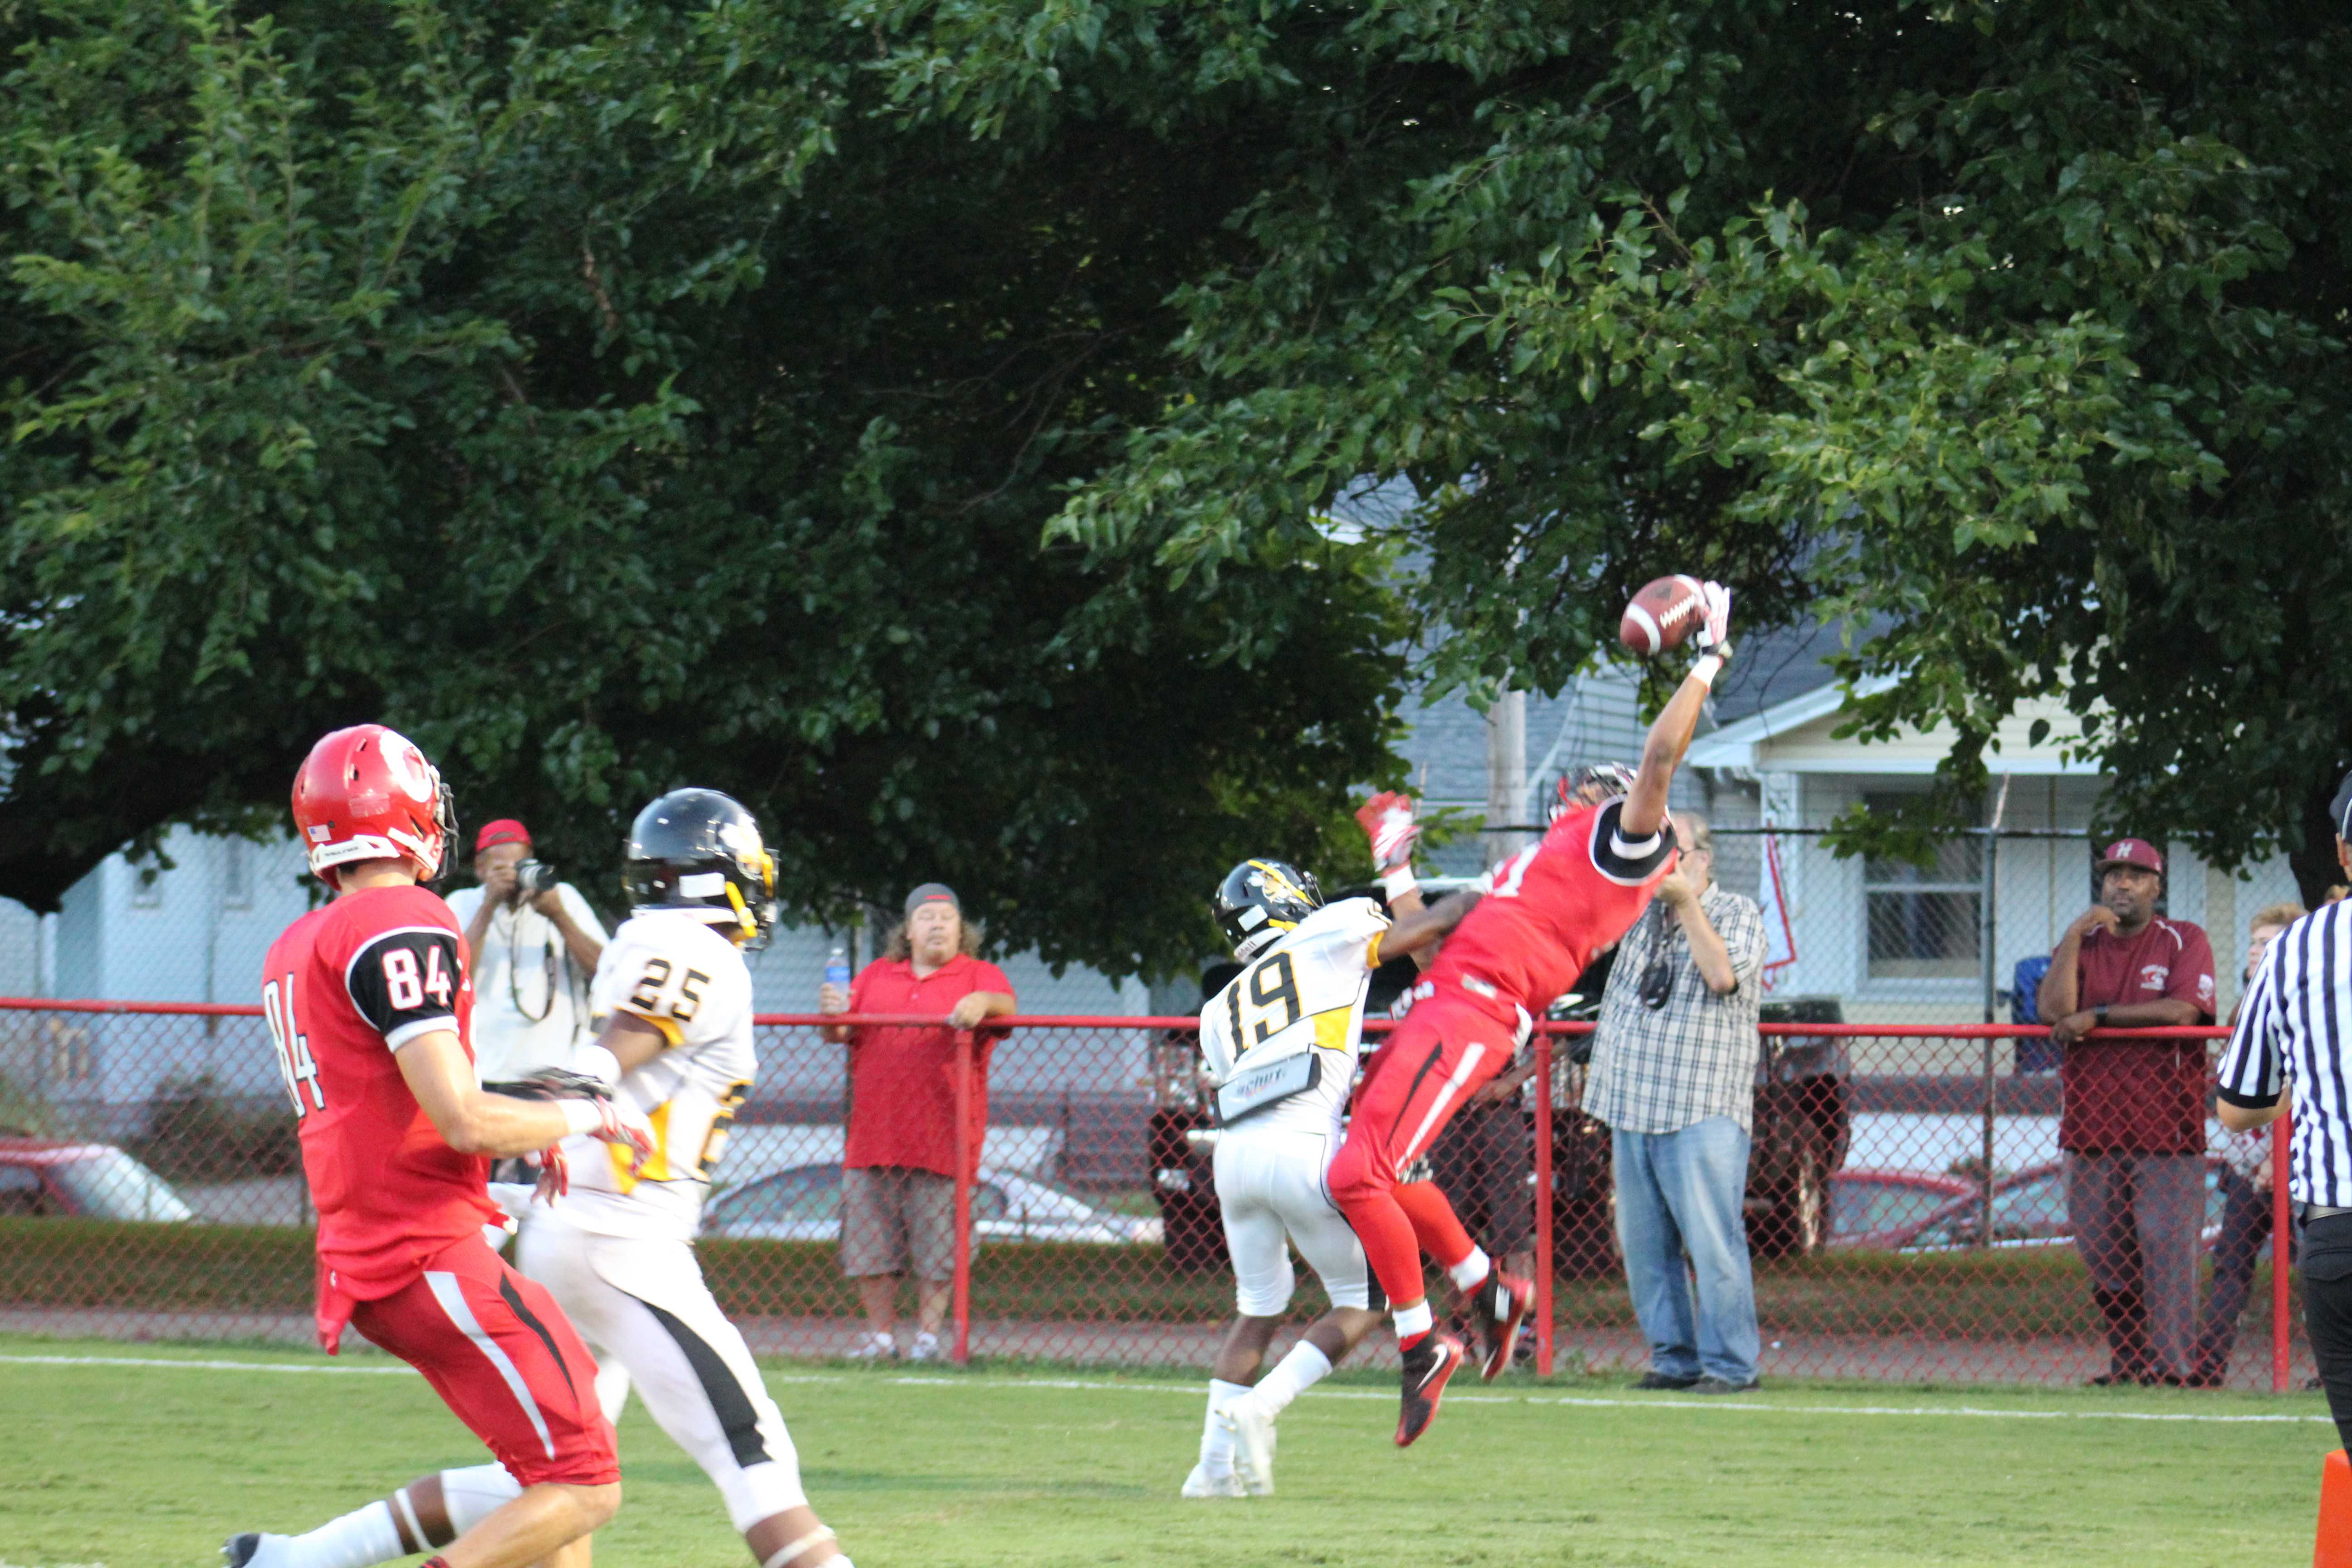 Jailen Carter (11, #11) makes a leaping catch to score Manuals first touchdown of the game. Photo by Kate Hatter 